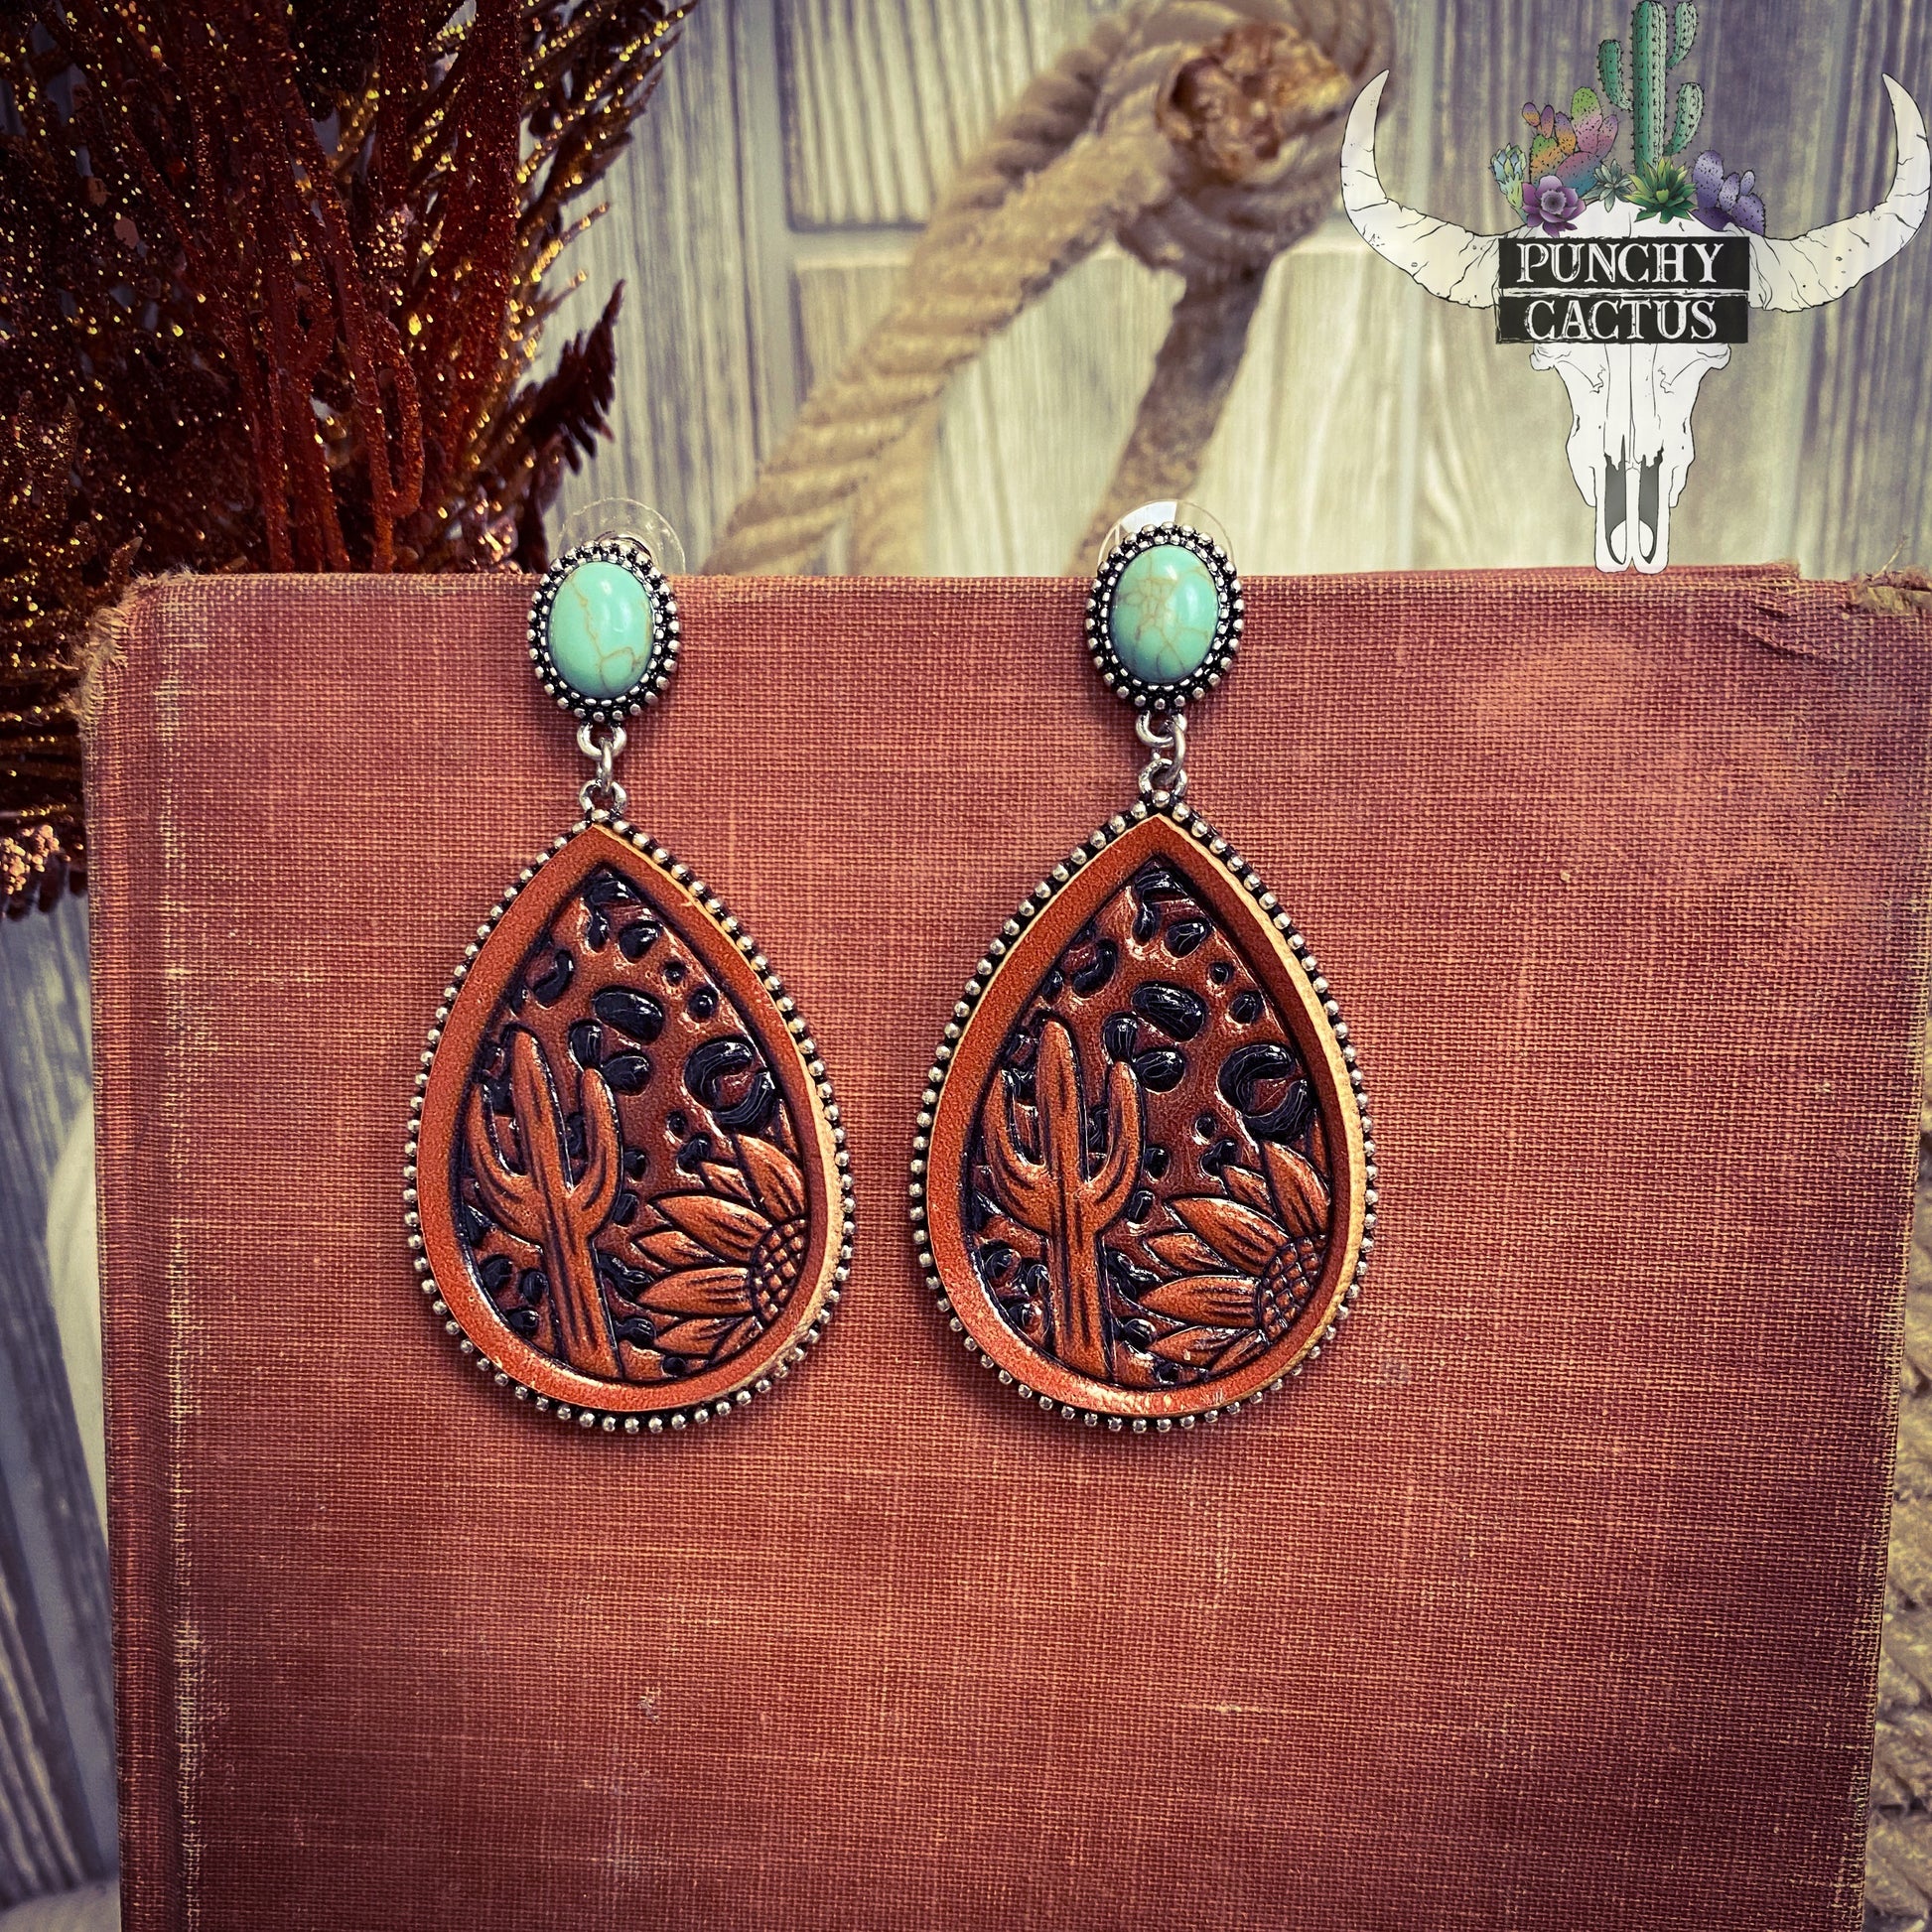 Turquoise stone with tear drop shaped leather tooled earrings  - tooled leather is cheetah print with a cactus and sunflower